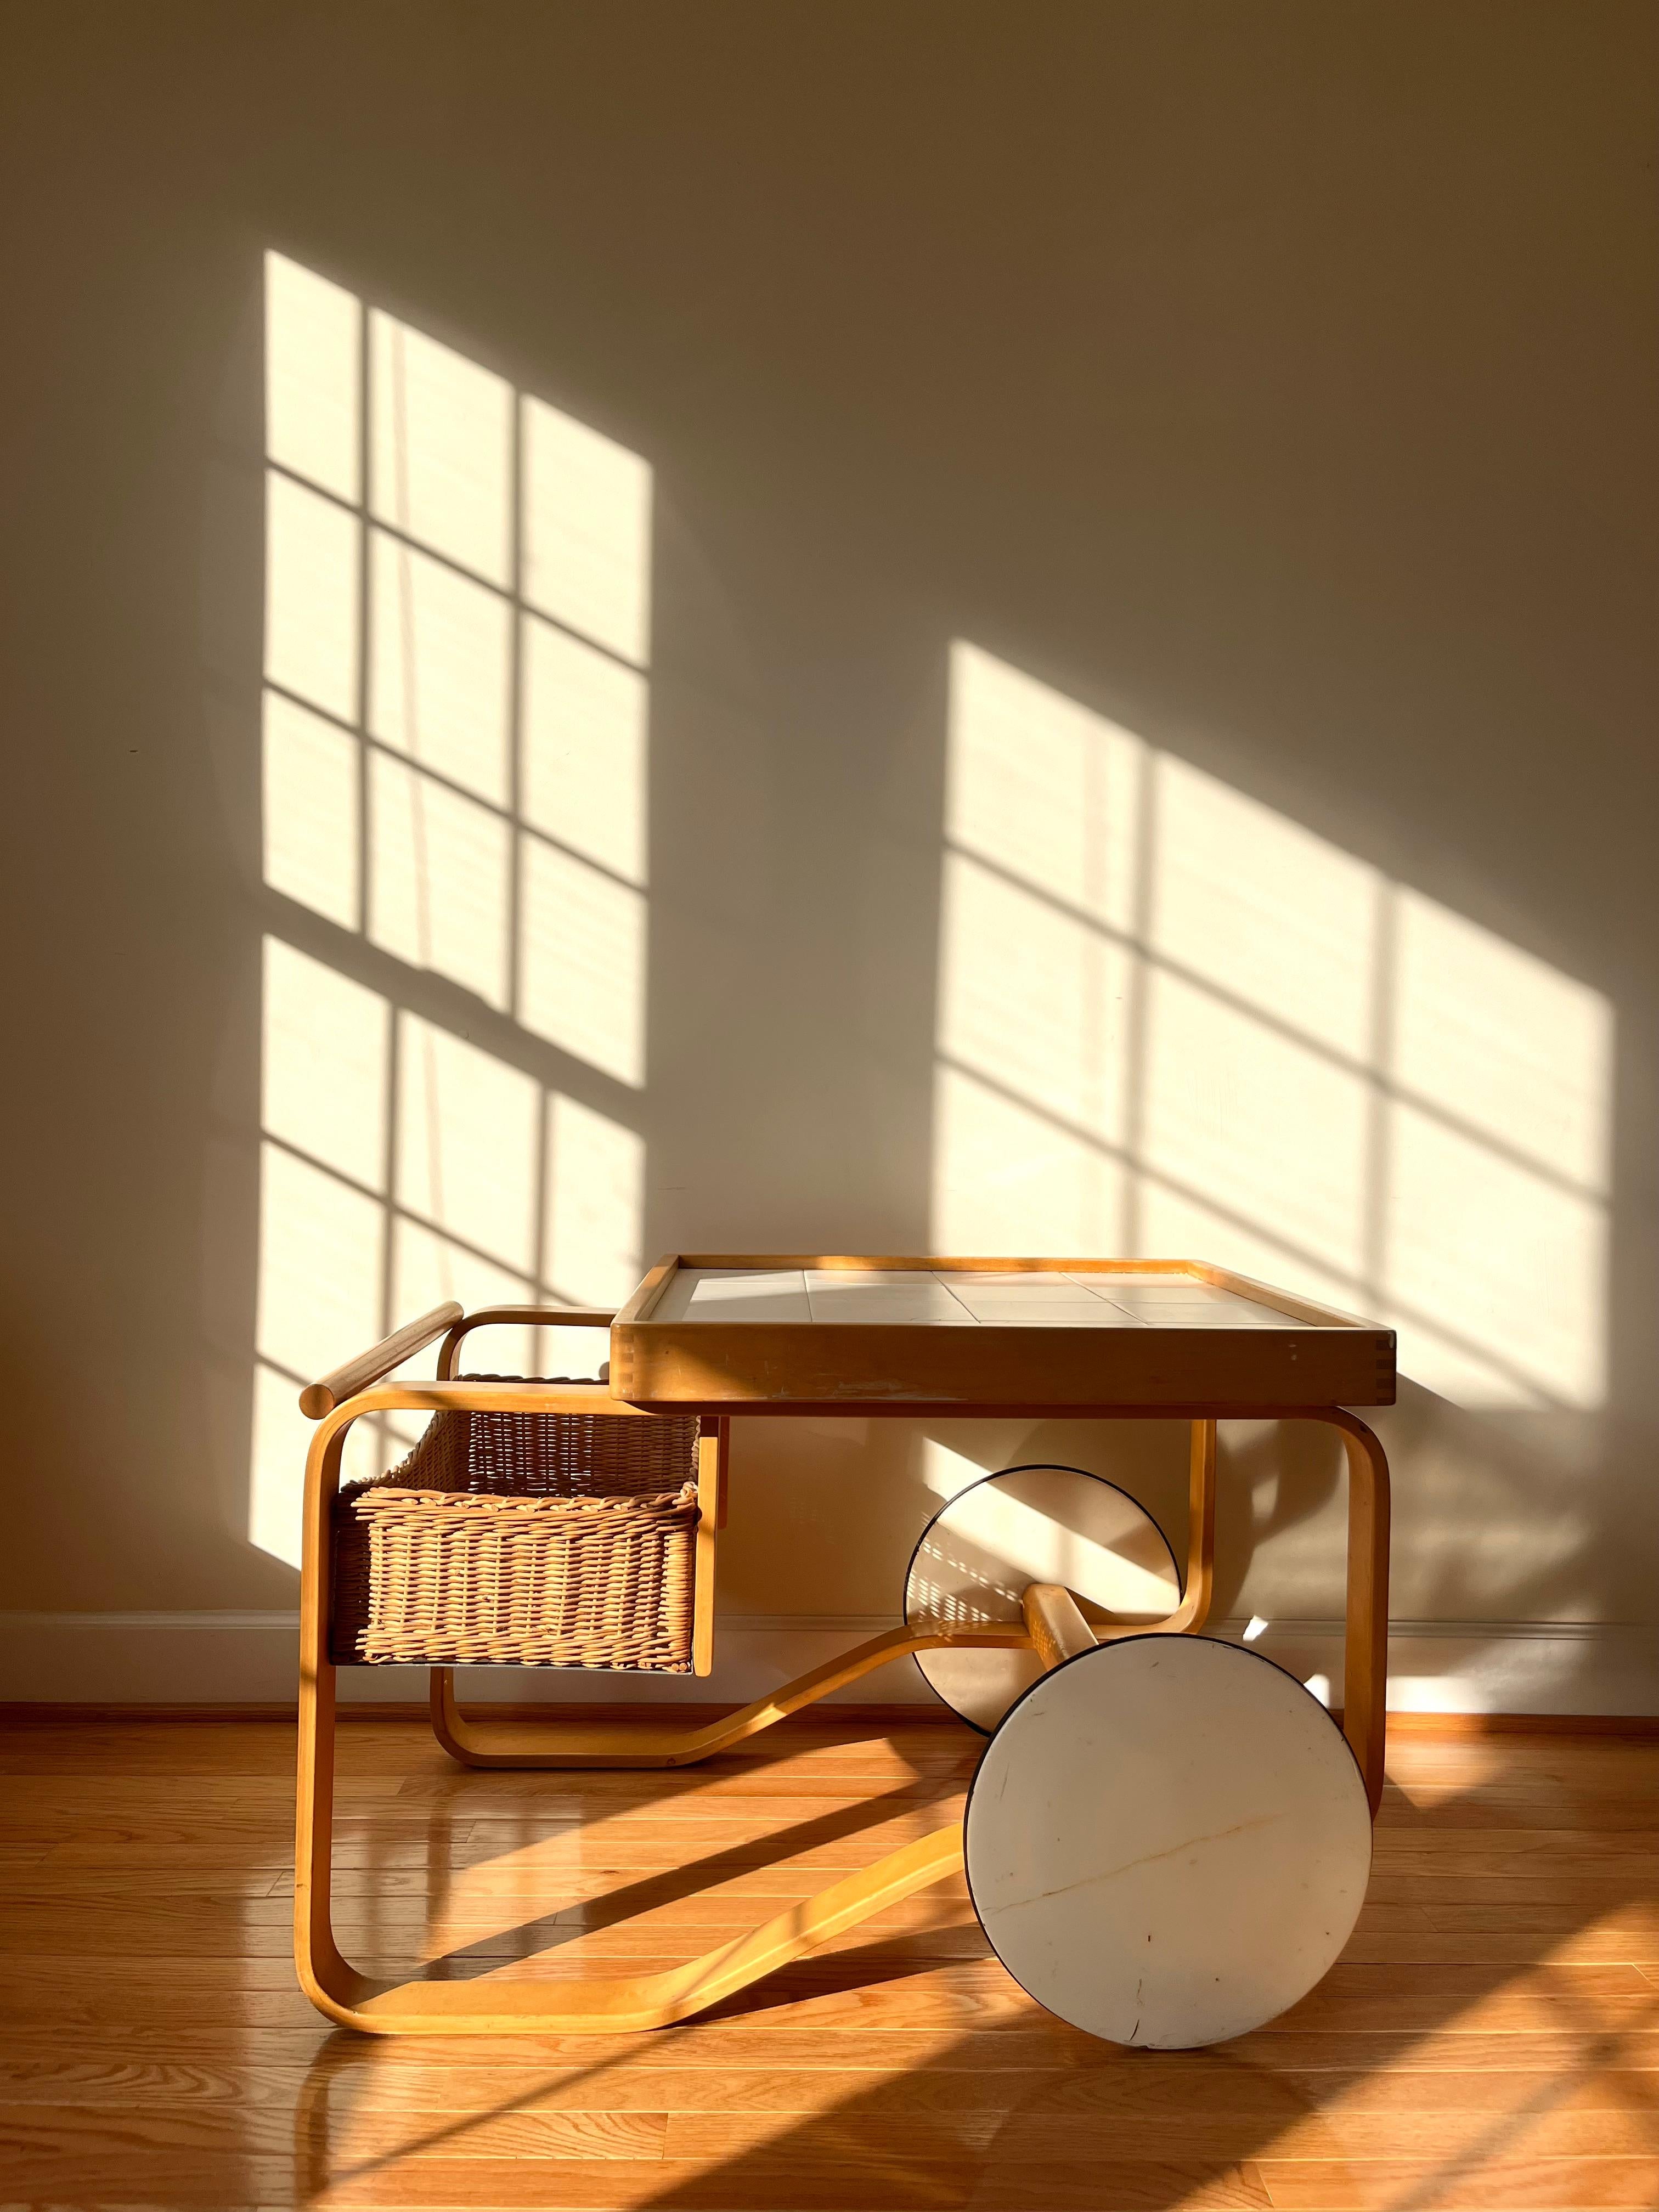 The tea trolley was inspired by British tea culture, which Aino and Alvar Aalto had become acquainted with though their many travels, as well as by the Japanese woodwork and architecture they admired. 
The striking Tea Trolley 900, which features